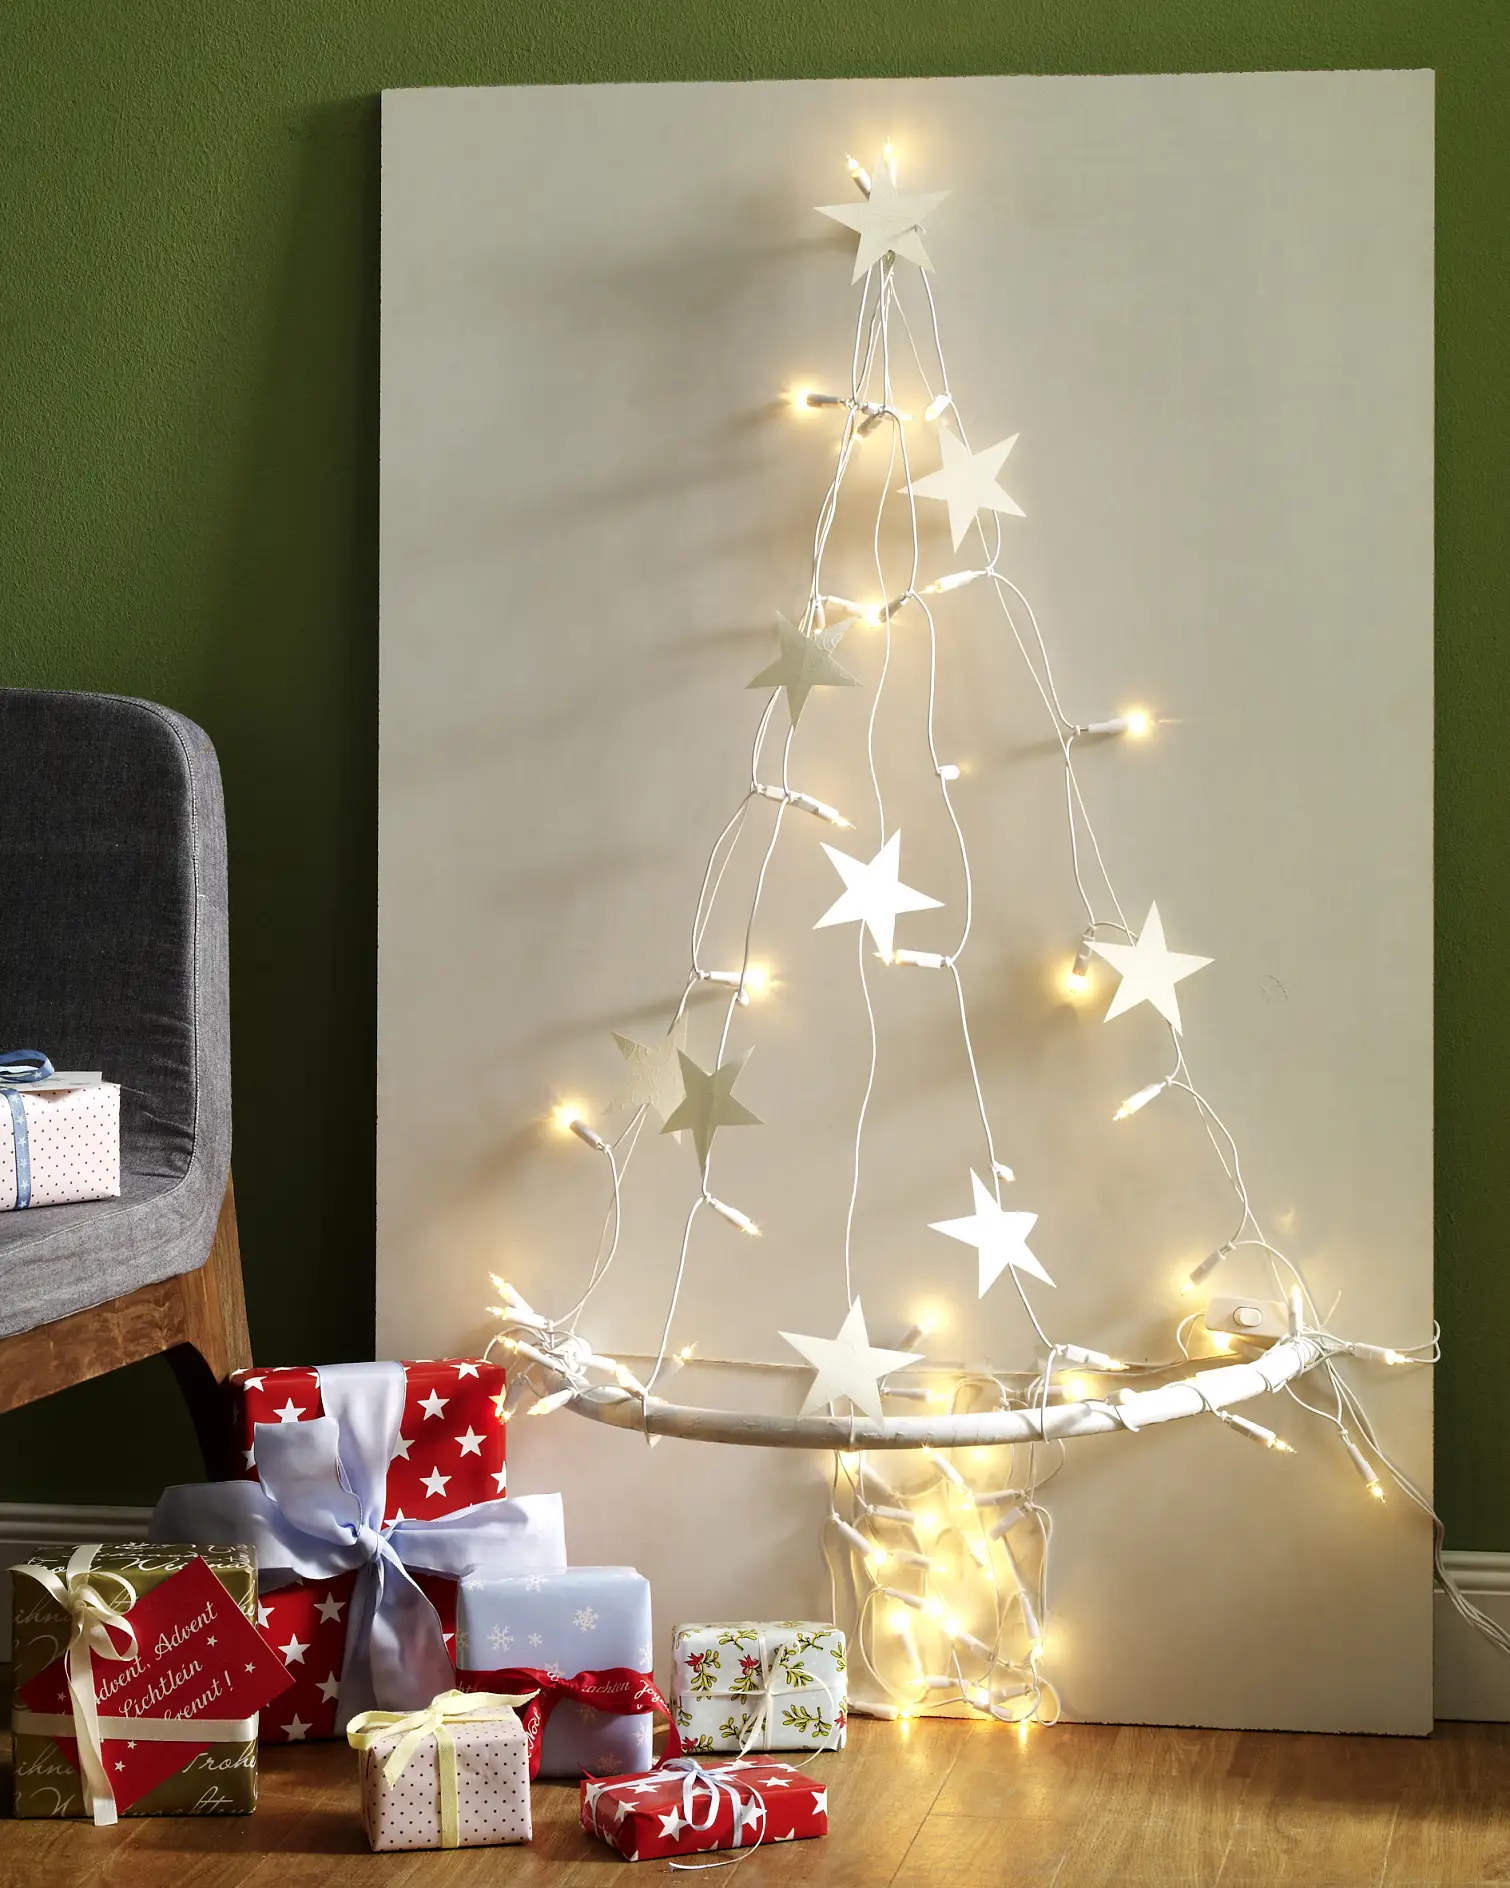 The final result of our creative diy christmas tree project. We hope you enjoyed this project and we wish you a merry christmas!